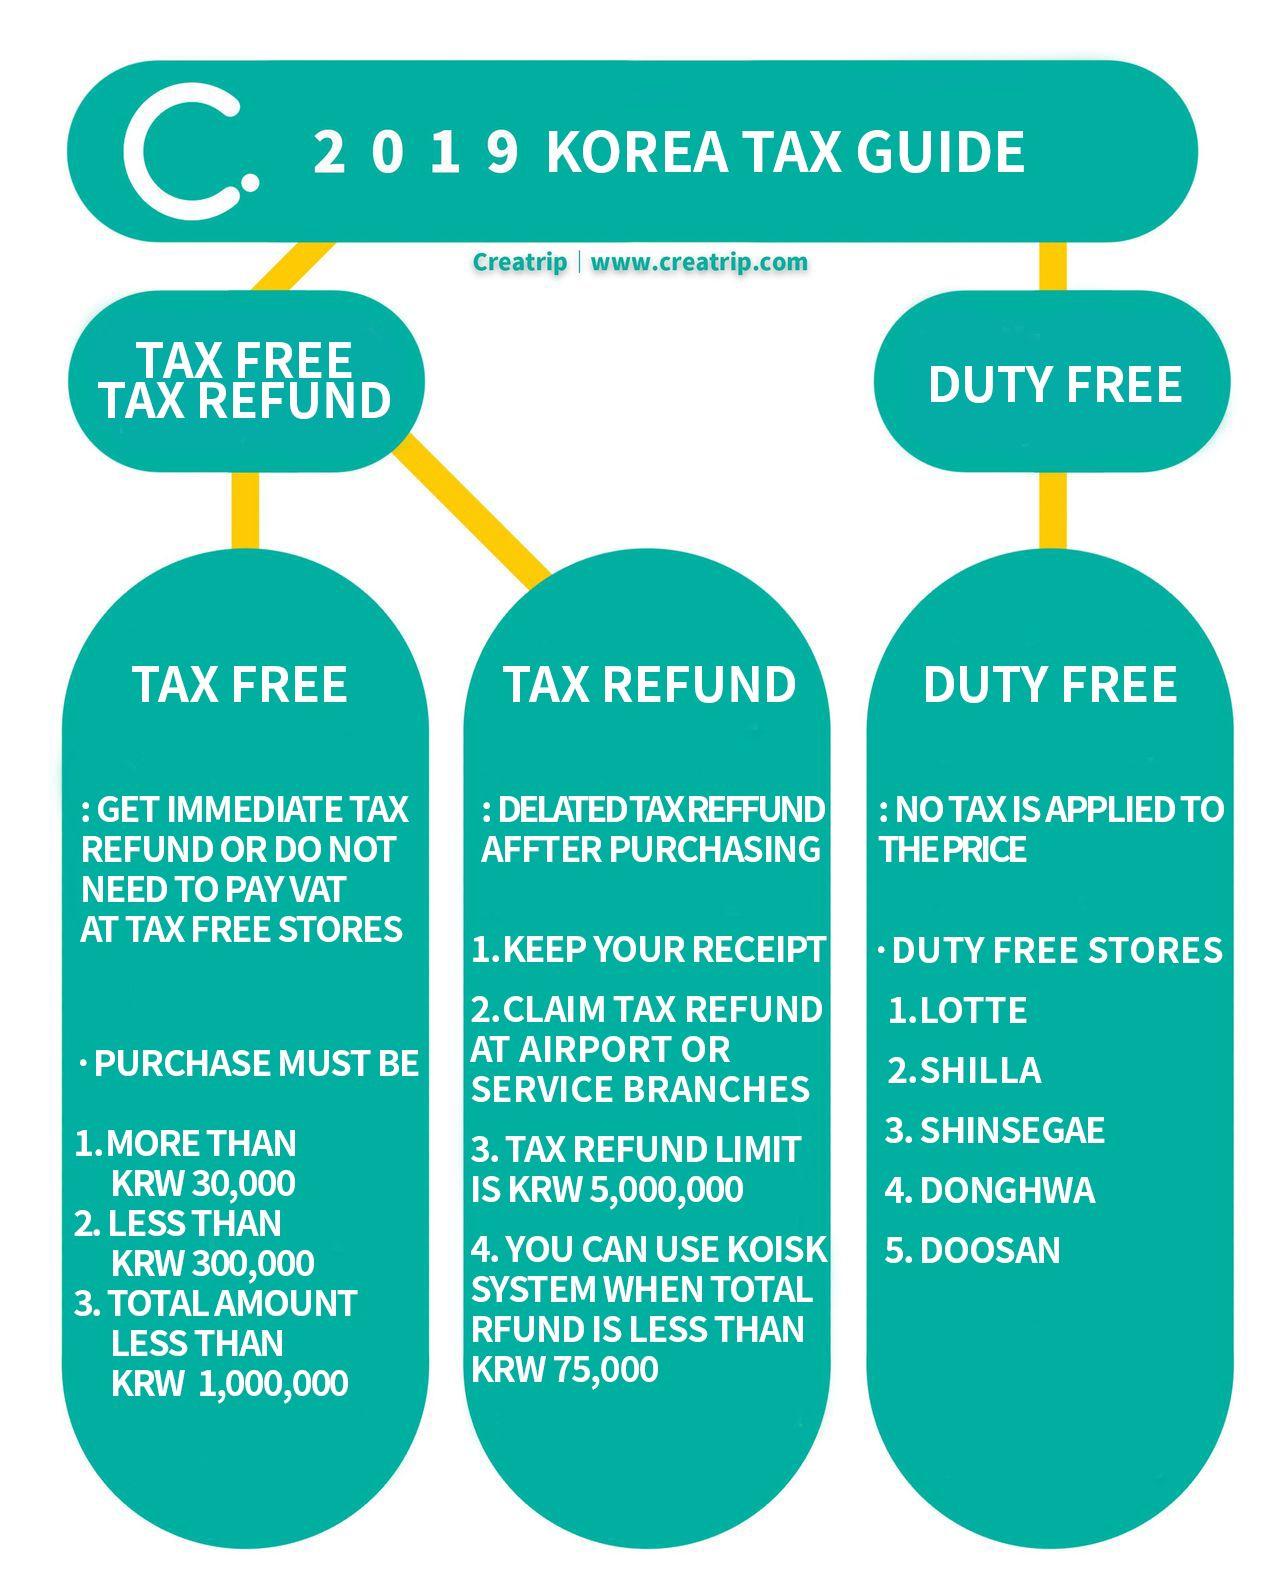 Creatrip How to get a tax refund in Korea